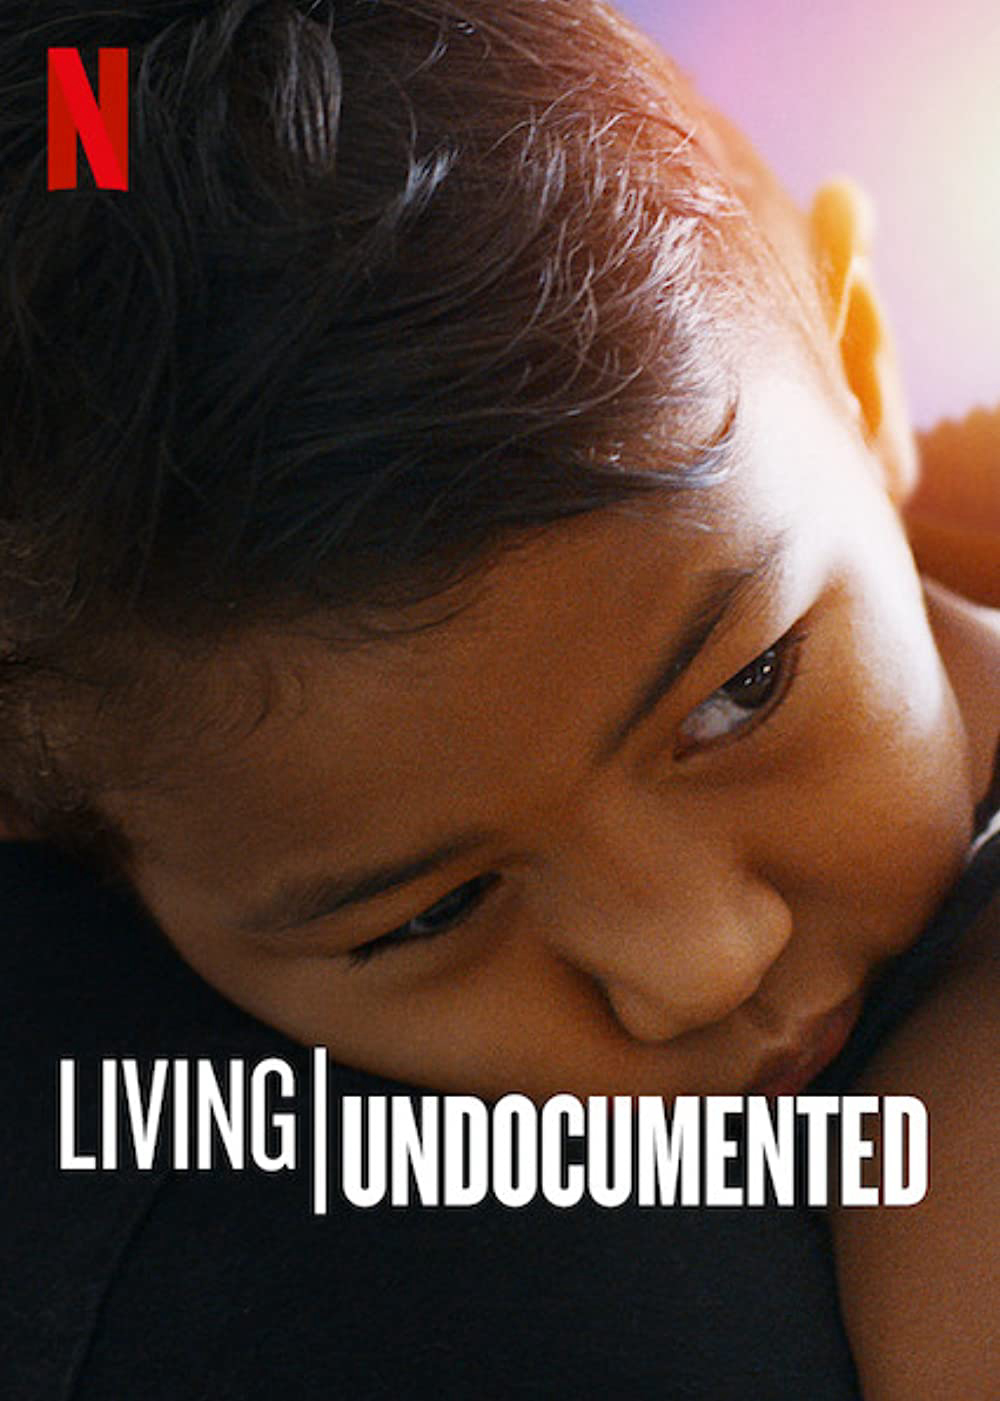 Poster Phim Sống chui (Living Undocumented)